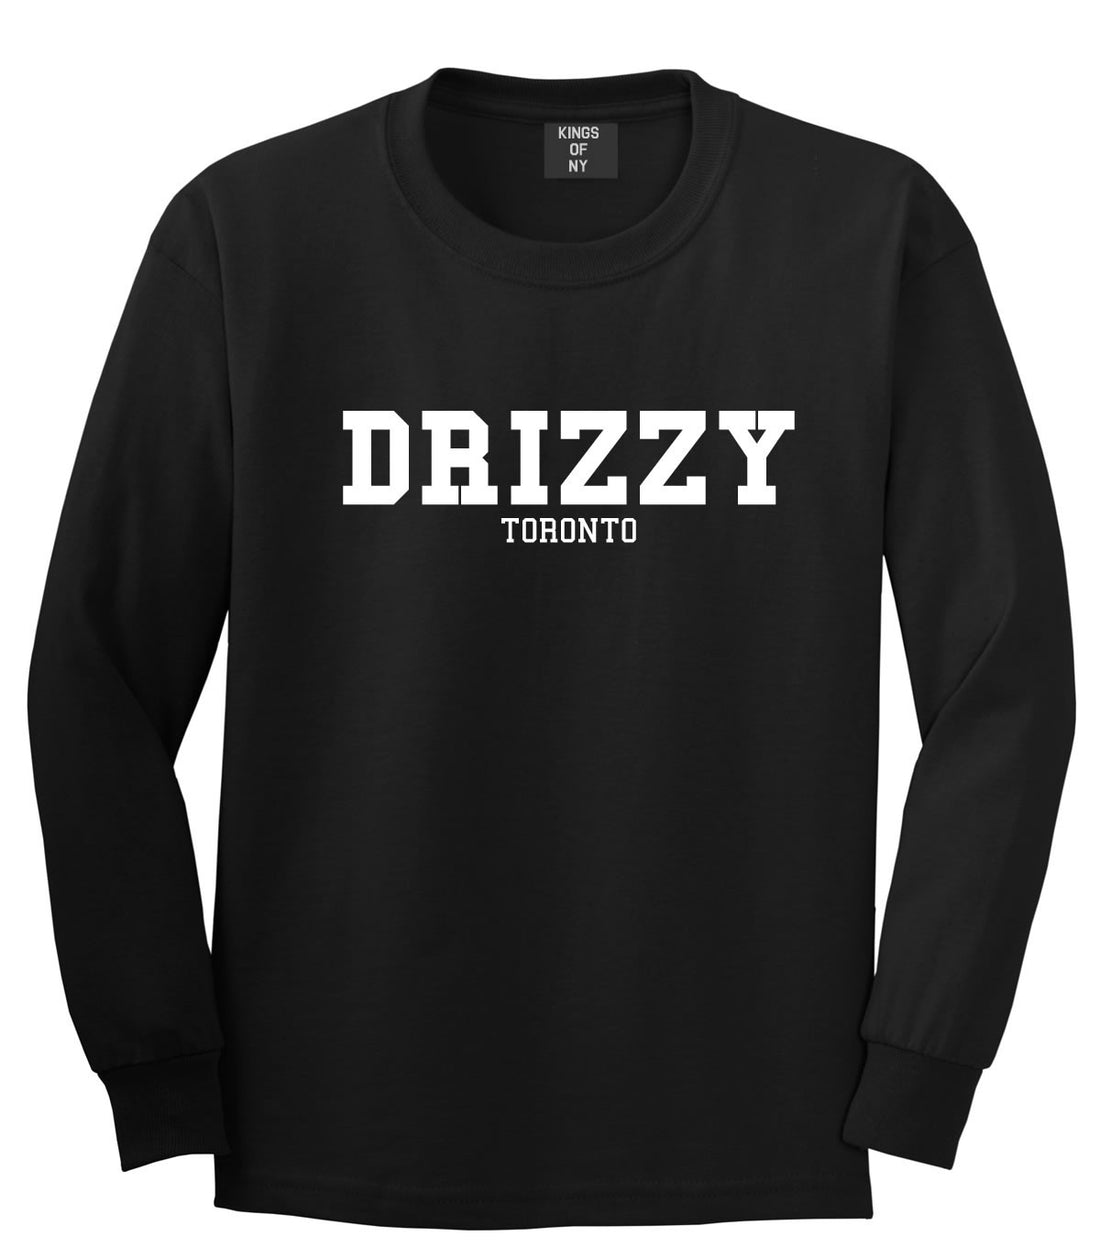 Drizzy Toronto Canada Long Sleeve T-Shirt in Black by Kings Of NY